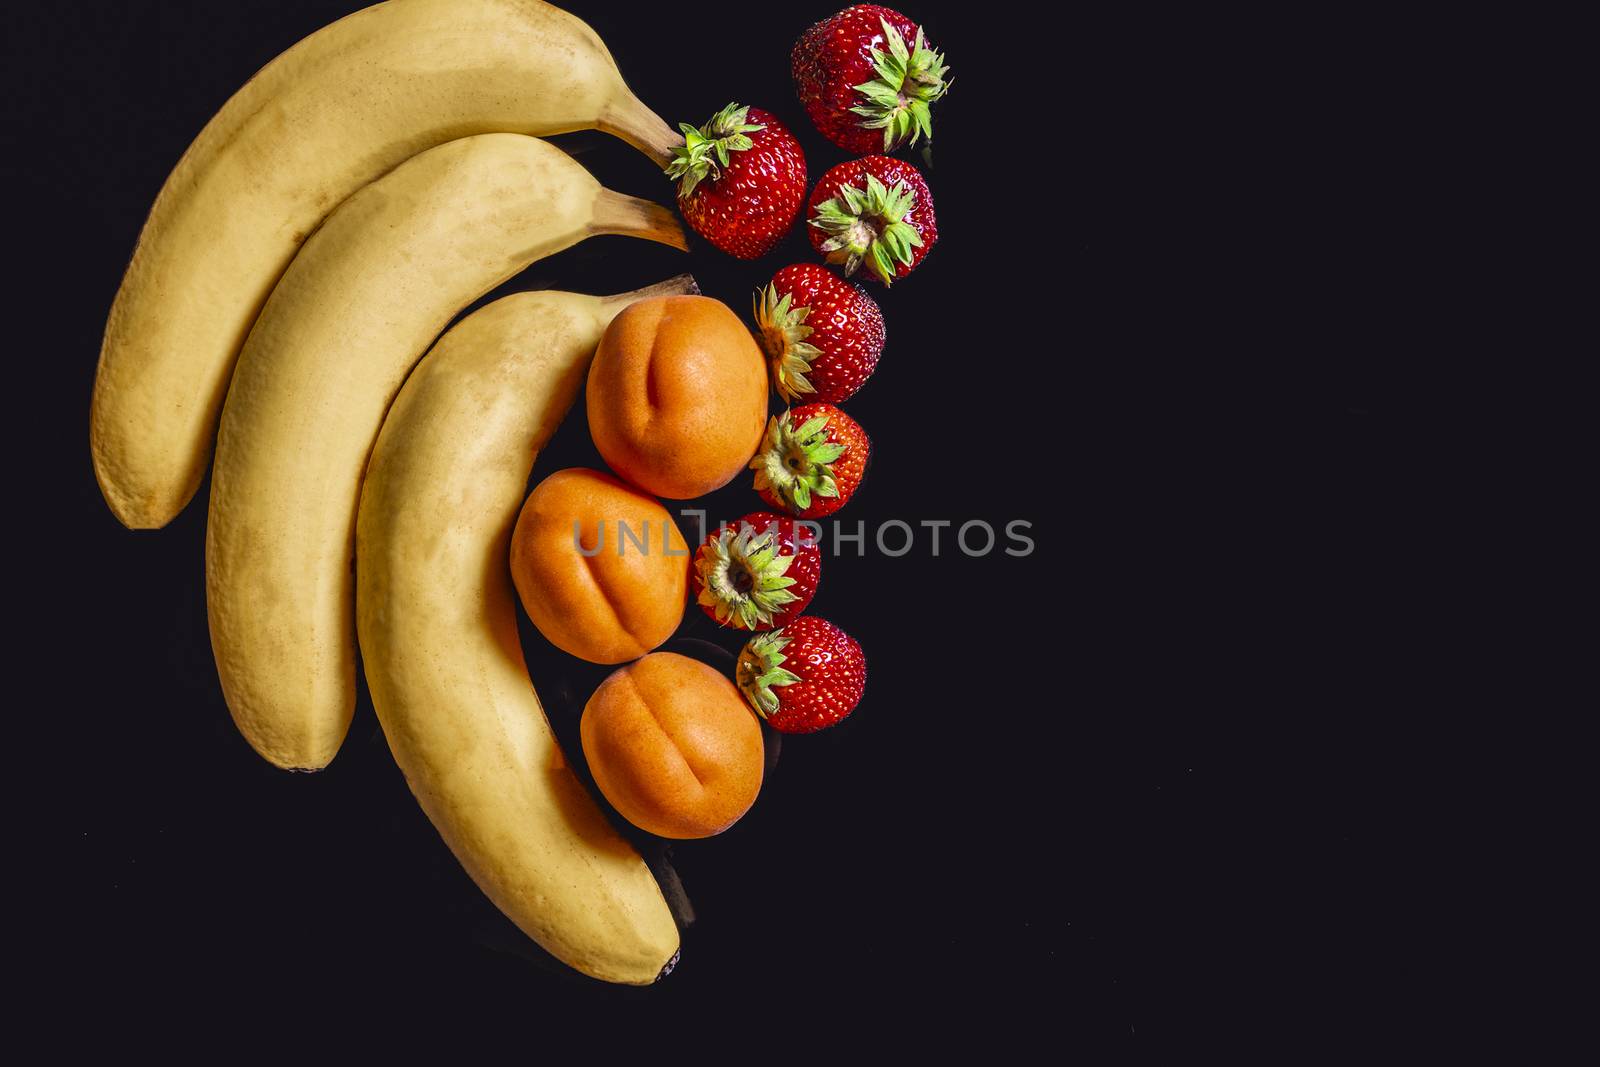 Bananas, apricots and strawberries against a black background with reflection